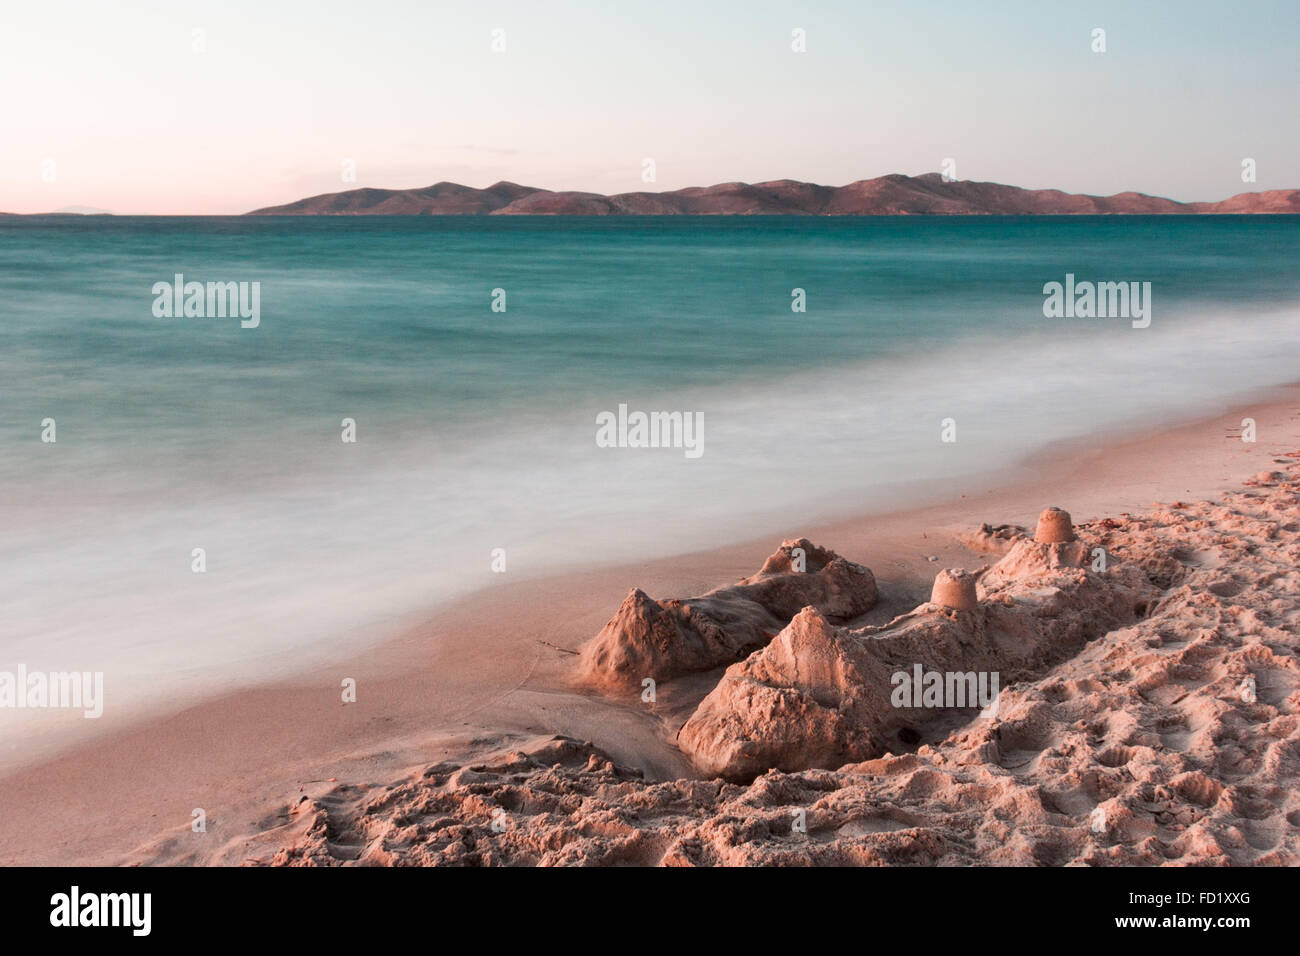 long exposure at dusk on beach with sandcastle in foreground, Pserimos in the background Stock Photo